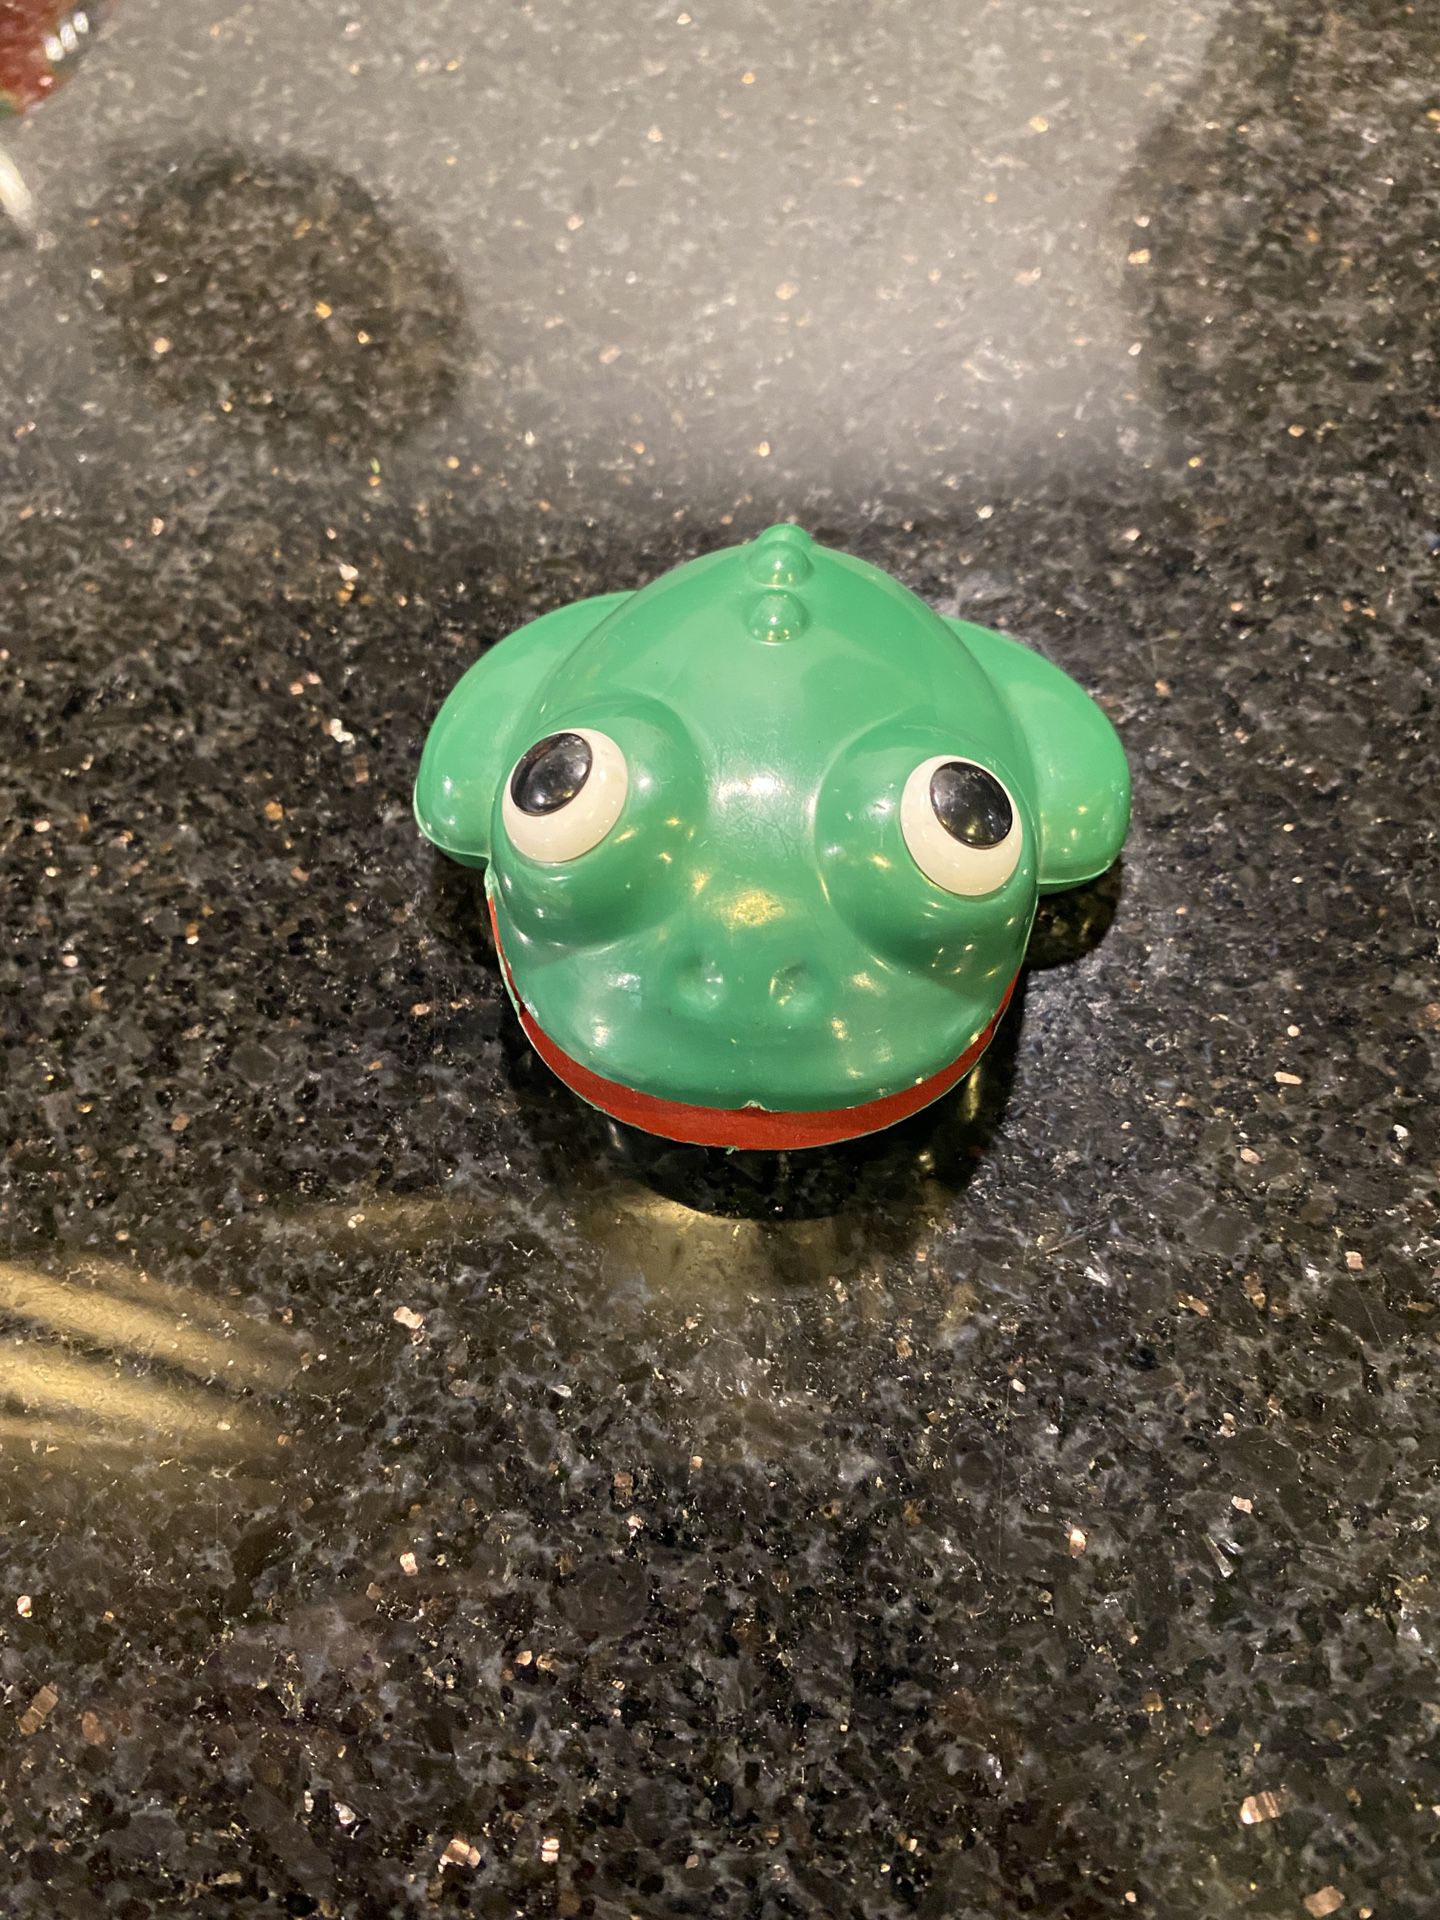 Rate Lehmann 912 Friction Frog Toy-Made in Western Germany